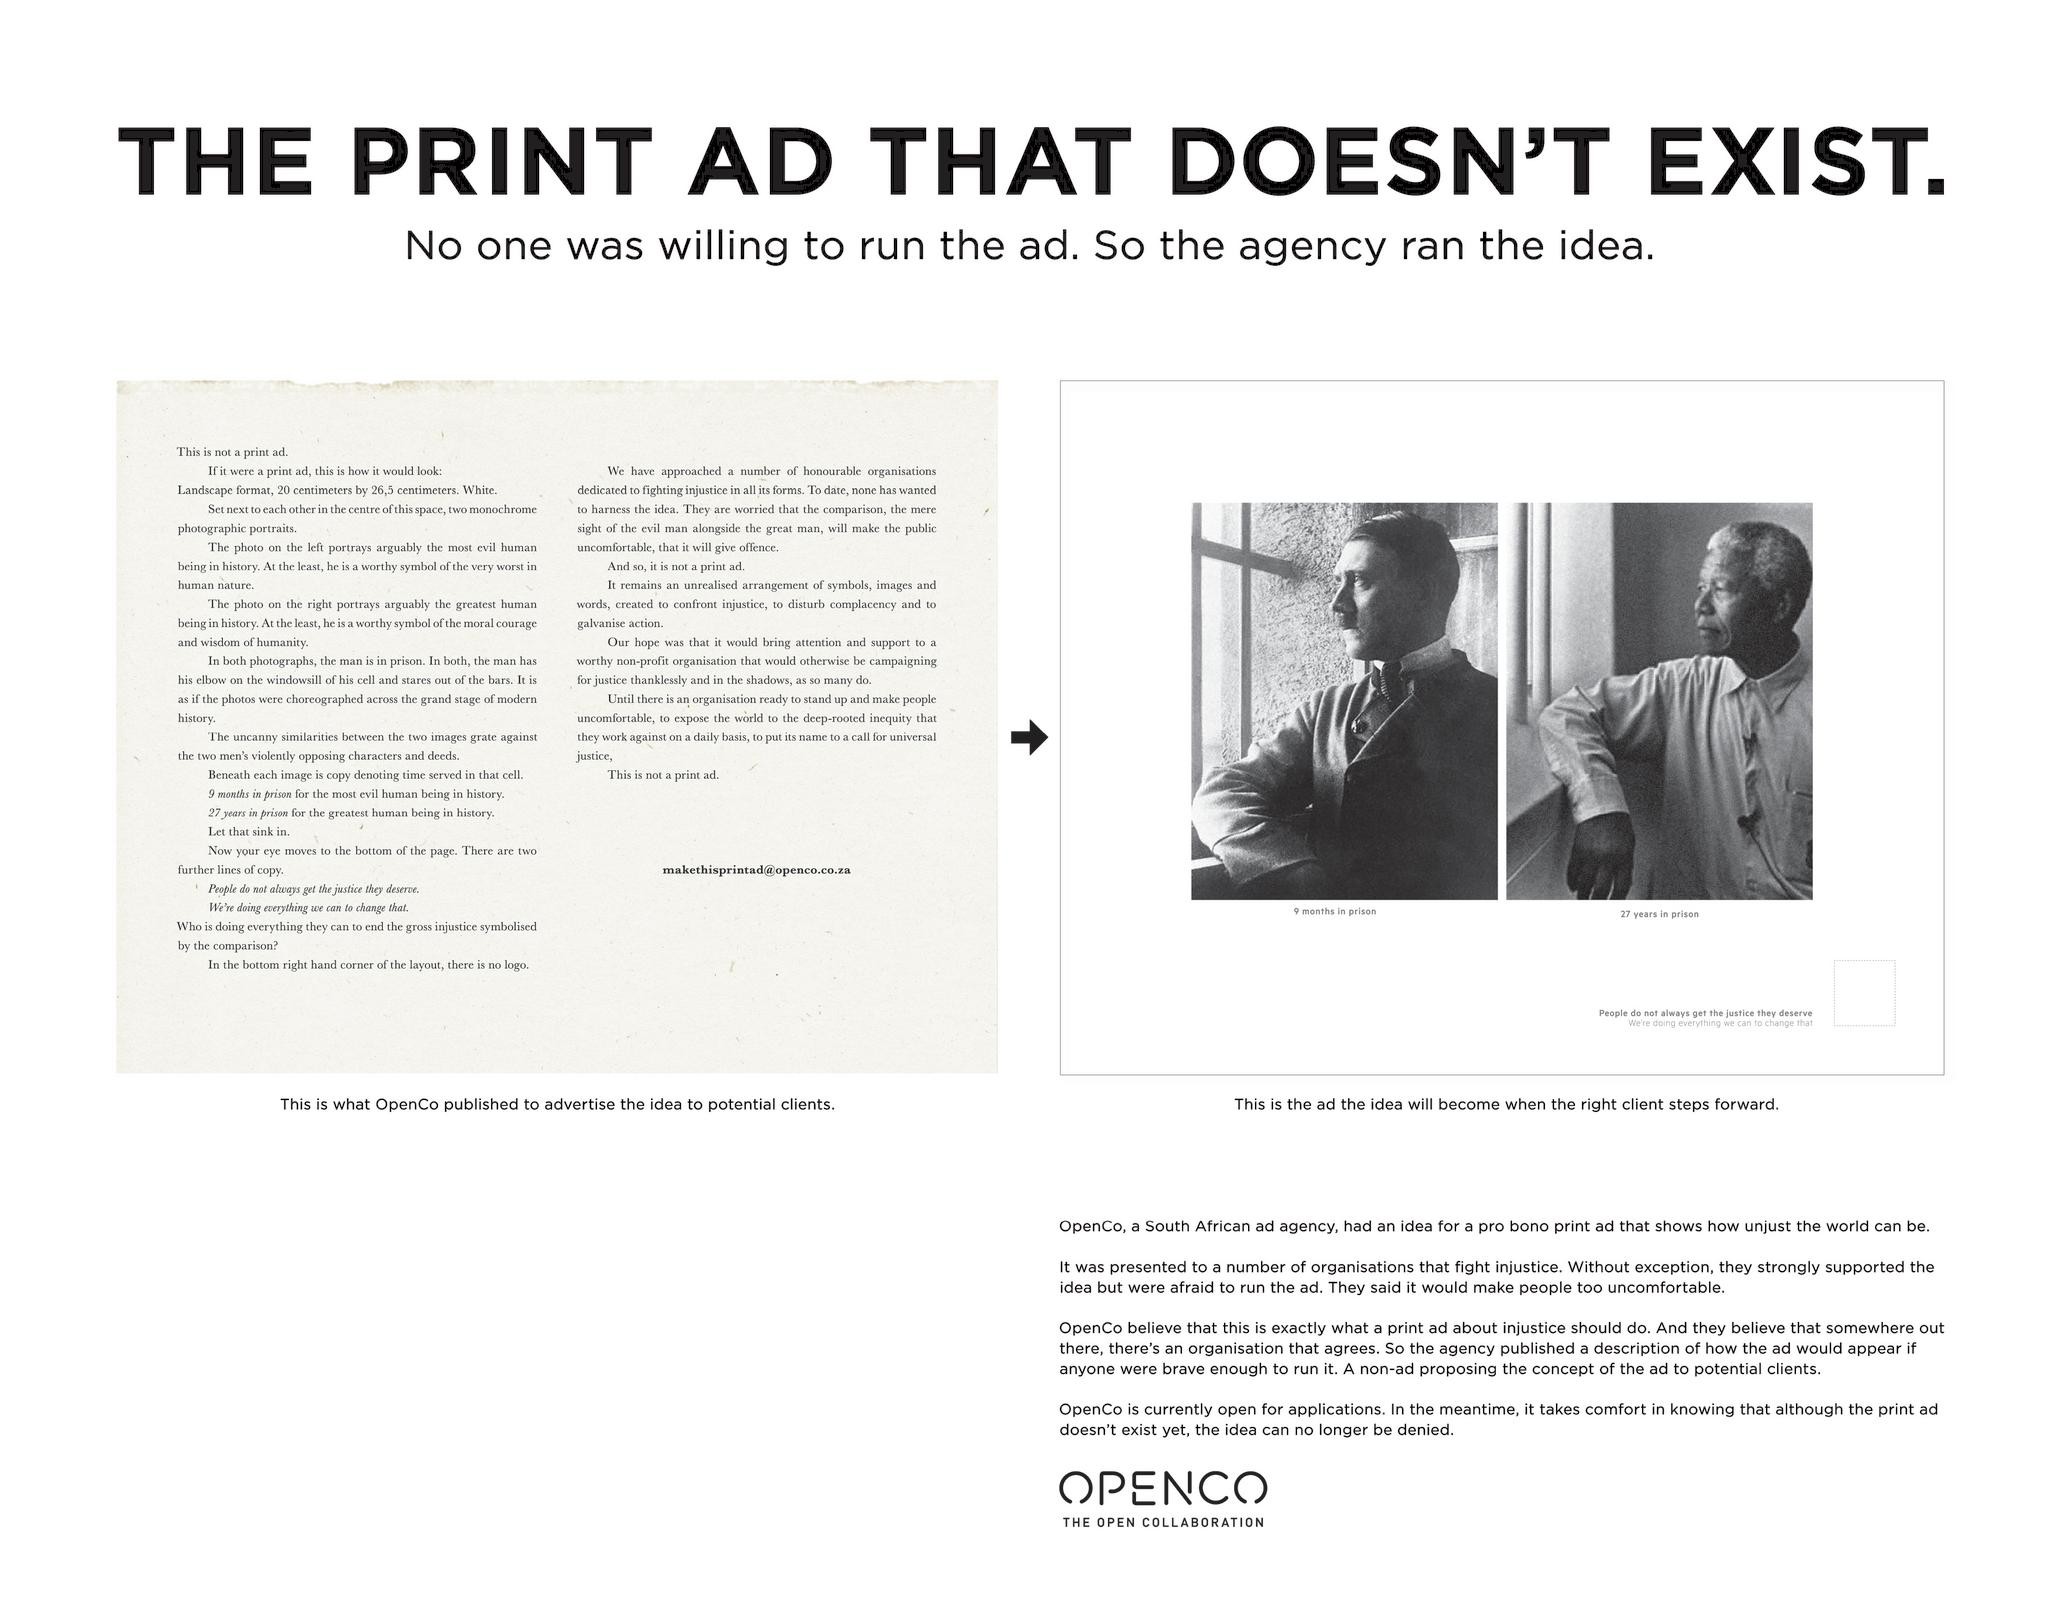 THIS IS NOT A PRINT AD